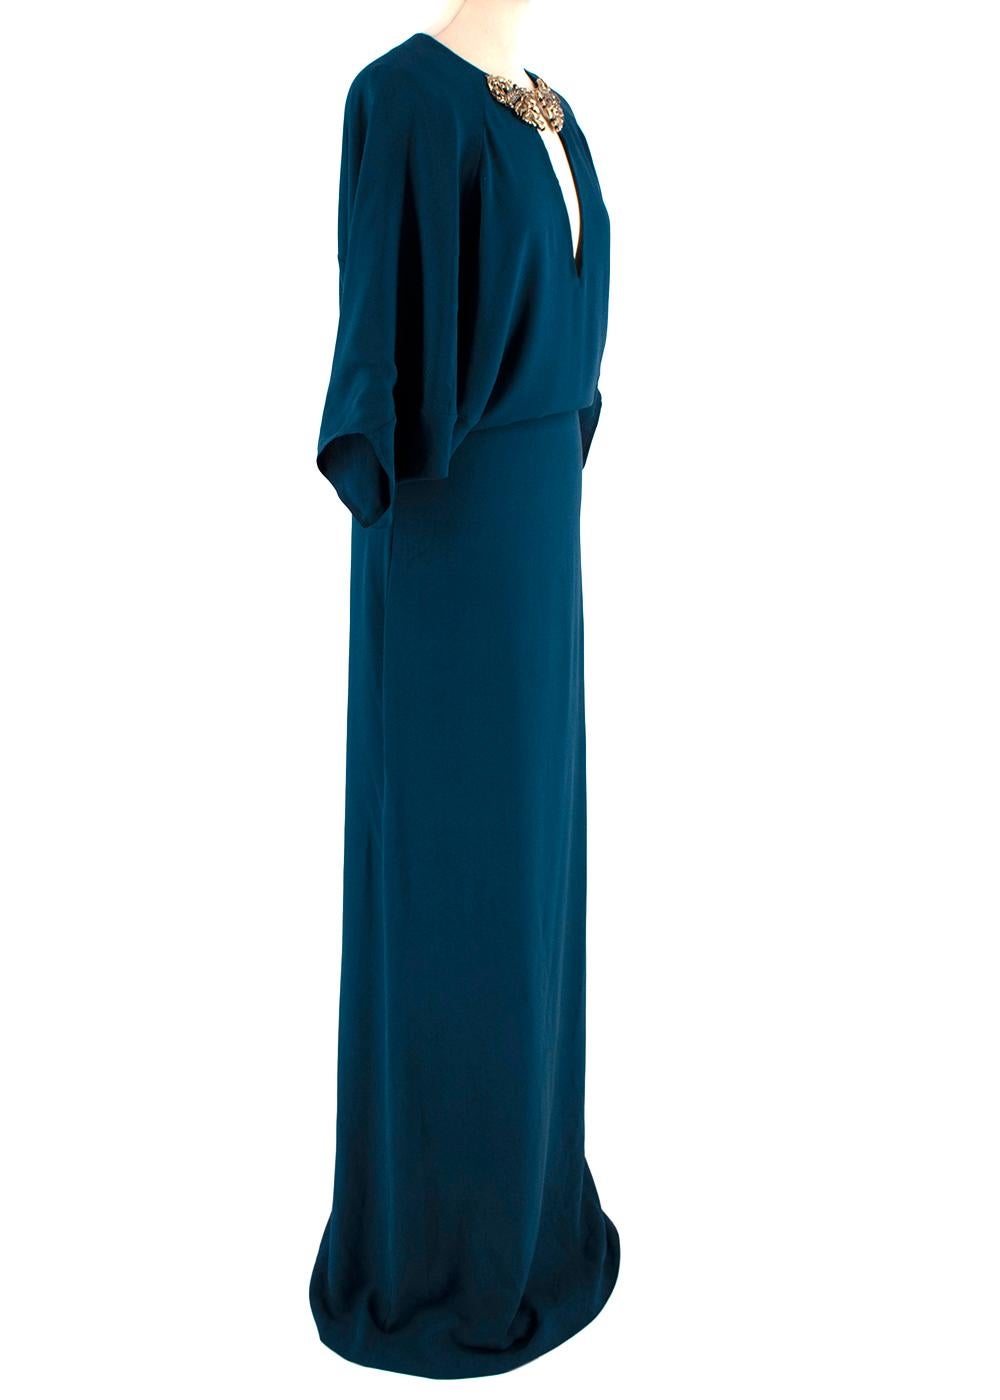 Roberto Cavalli Blue Silk Dragon Embellished Maxi Dress

- Lightweight silk 
- Cape-effect 
- Maxi length 
- Jewelled gold plated dragon neck embellishment 

Materials: 
100% Silk 

Dry Clean Only 

Made in Italy 

Shoulders - 39cm
Sleeves -